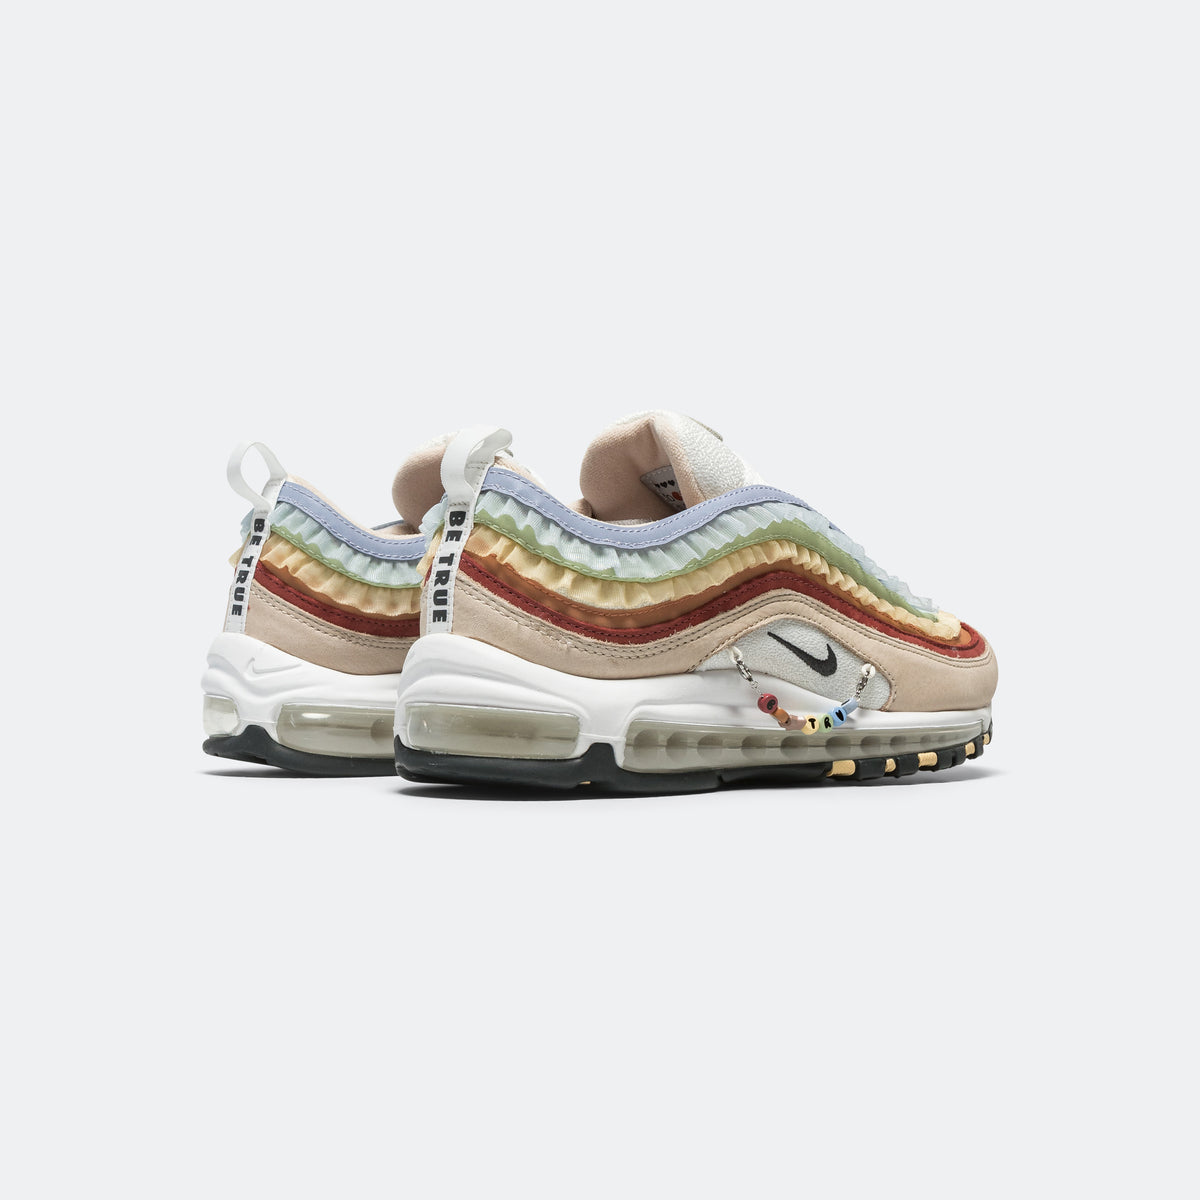 sigaar voering Kreet Nike Air Max 97 'Be True' - Pink Oxford/Anthracite-Adobe | UP THERE